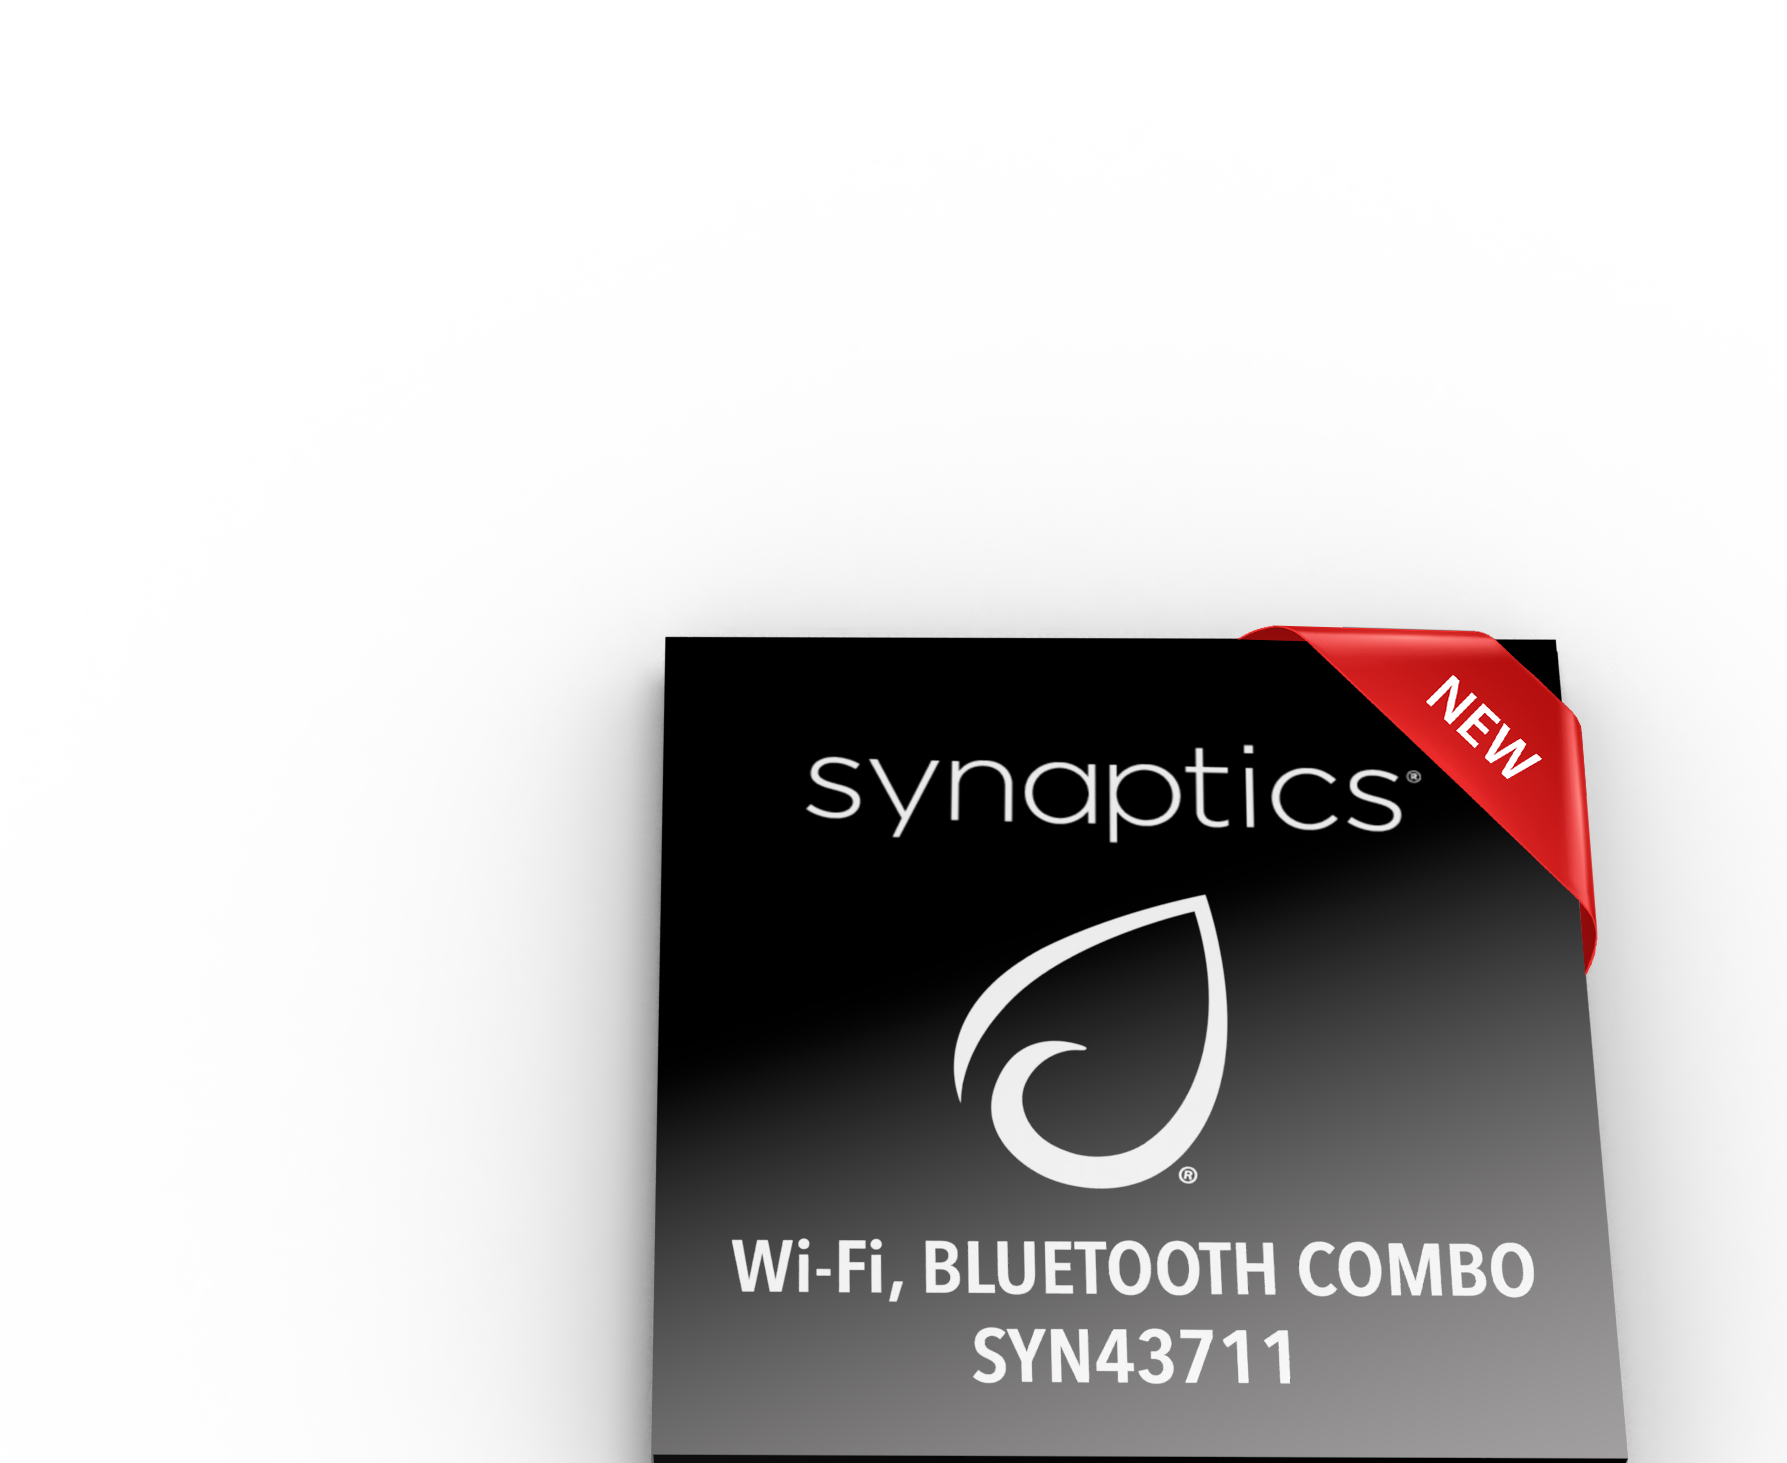 SYN43711 Wi-Fi Bluetooth Combo chip